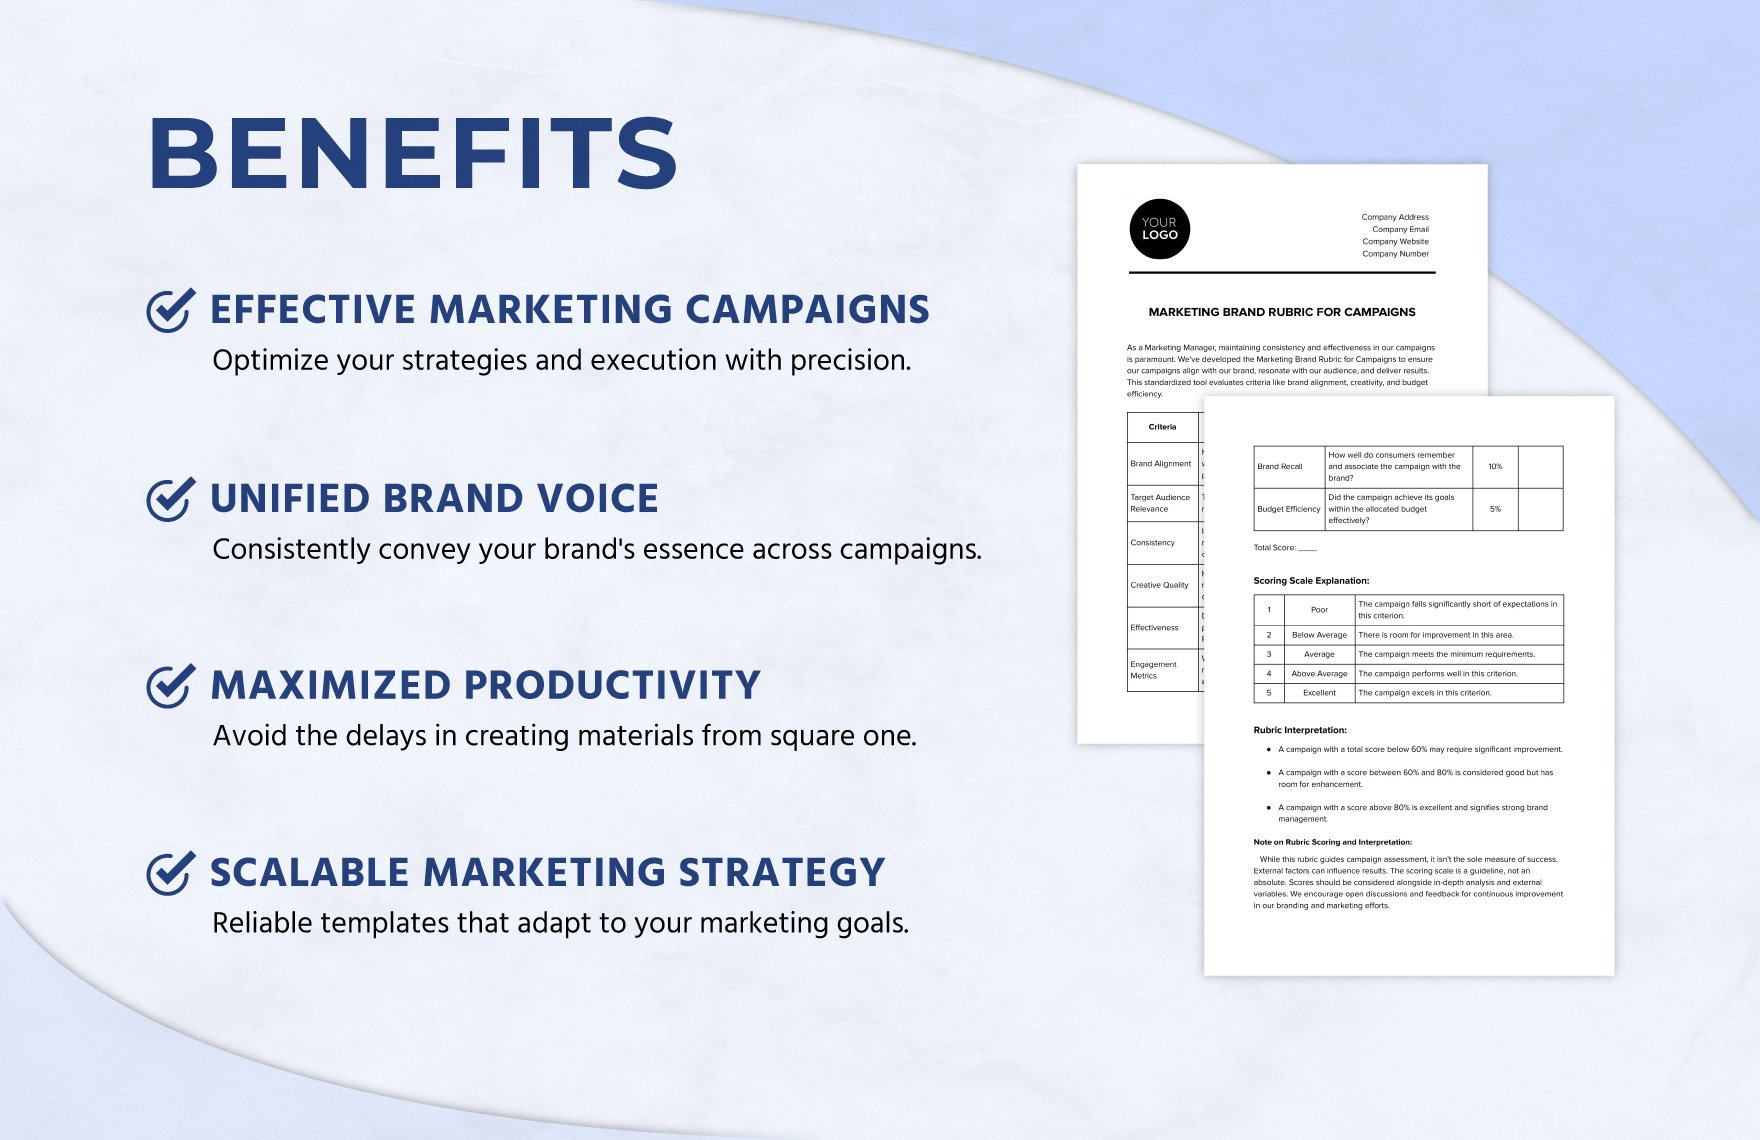 Marketing Brand Rubric for Campaigns Template